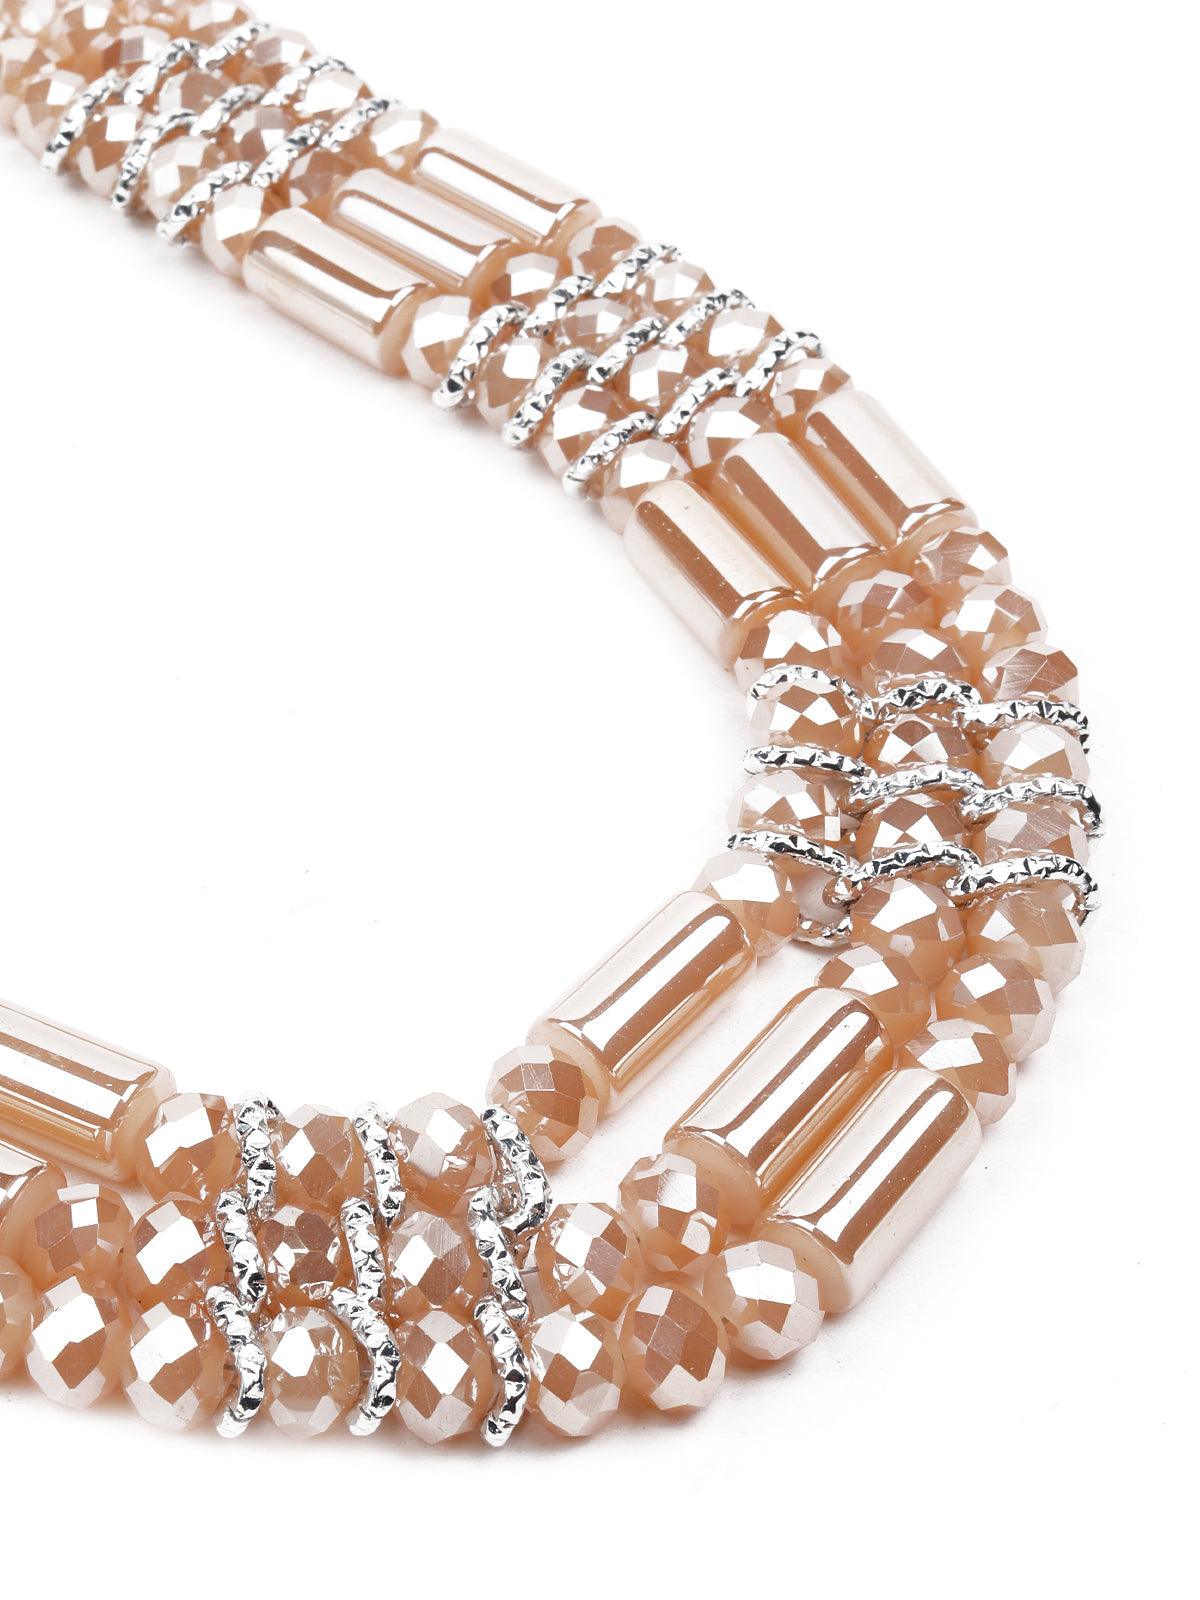 Women's Gorgeous Light Gold Layered Necklace - Odette